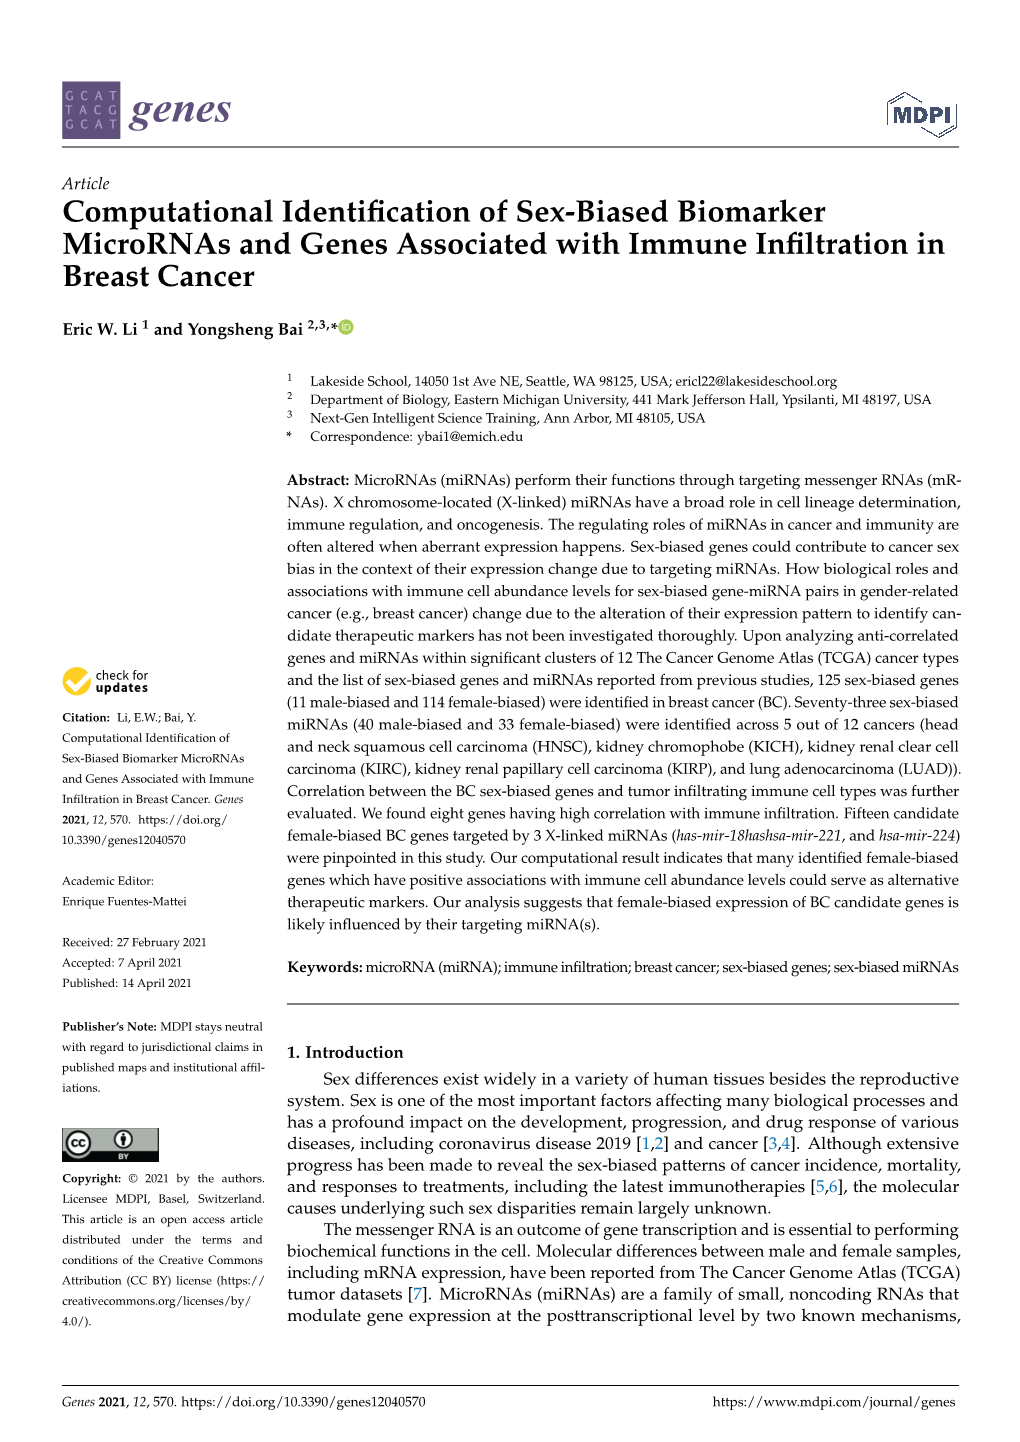 Computational Identification of Sex-Biased Biomarker Micrornas and Genes Associated with Immune Infiltration in Breast Cancer